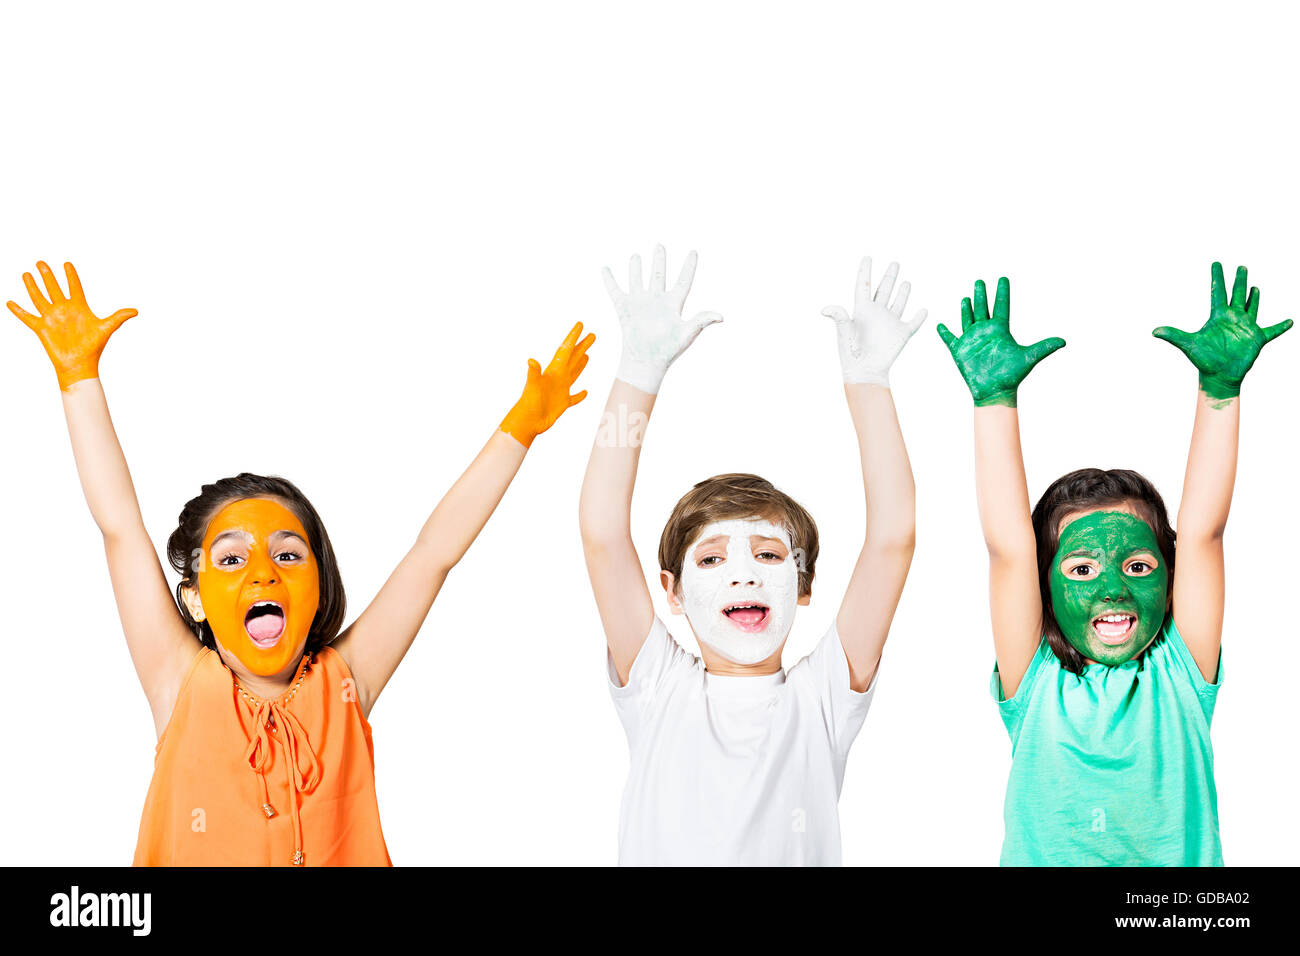 3 indians Kids friends Independence Day face paint Standing shouting Stock Photo